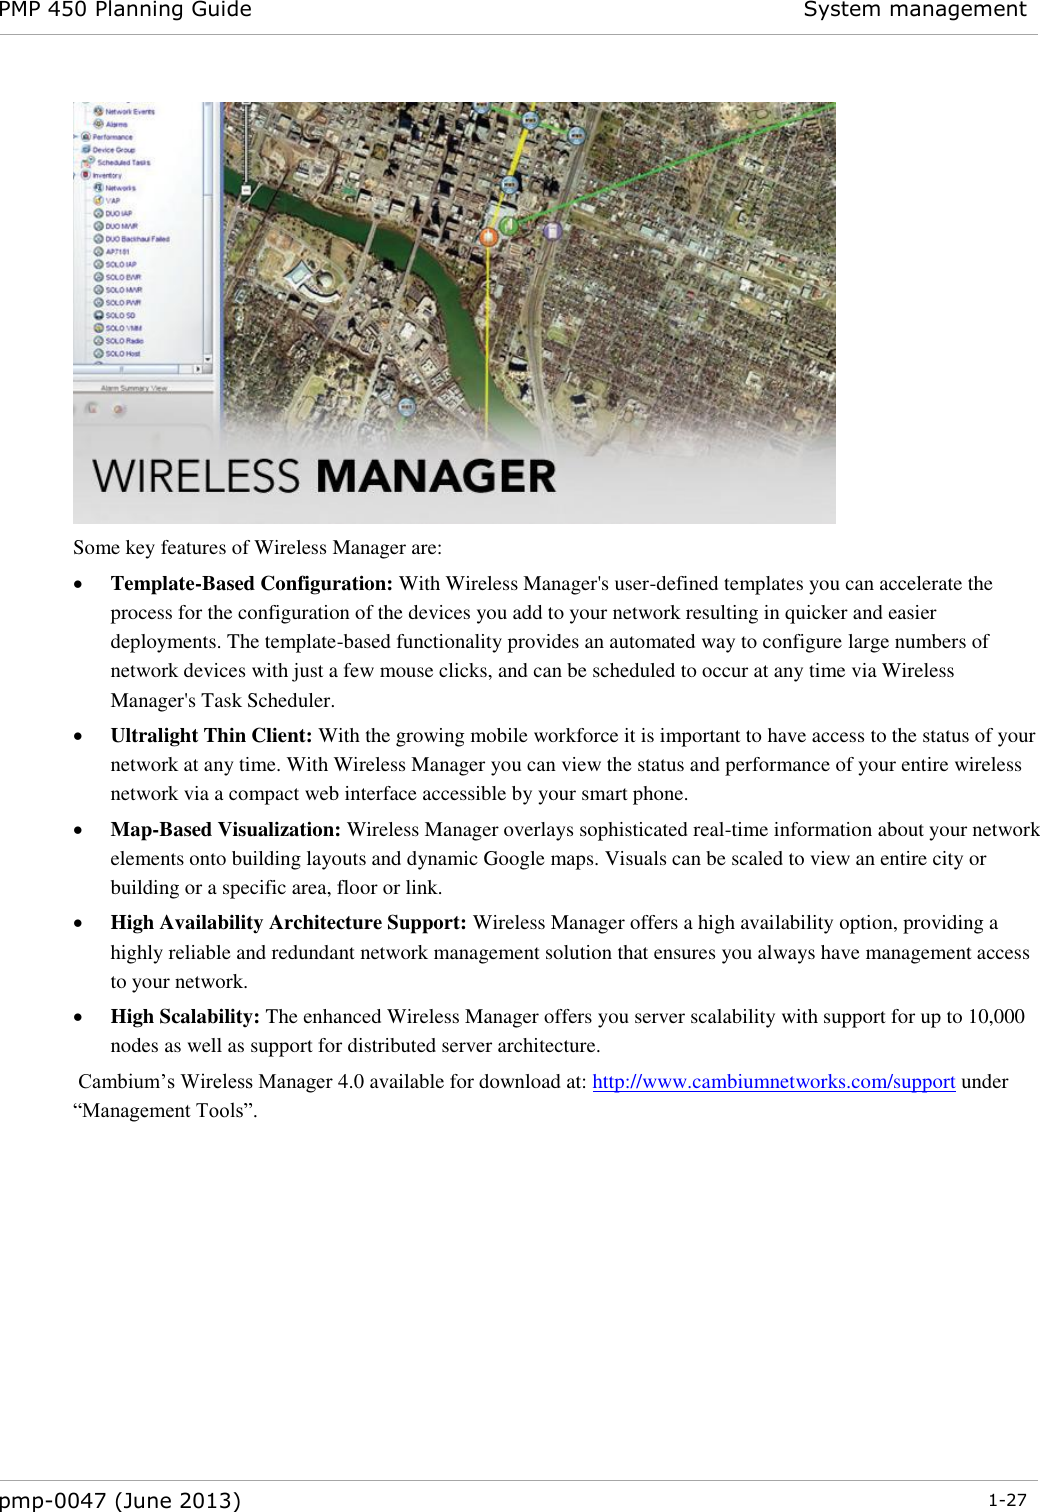 PMP 450 Planning Guide System management  pmp-0047 (June 2013)  1-27   Some key features of Wireless Manager are:  Template-Based Configuration: With Wireless Manager&apos;s user-defined templates you can accelerate the process for the configuration of the devices you add to your network resulting in quicker and easier deployments. The template-based functionality provides an automated way to configure large numbers of network devices with just a few mouse clicks, and can be scheduled to occur at any time via Wireless Manager&apos;s Task Scheduler.  Ultralight Thin Client: With the growing mobile workforce it is important to have access to the status of your network at any time. With Wireless Manager you can view the status and performance of your entire wireless network via a compact web interface accessible by your smart phone.  Map-Based Visualization: Wireless Manager overlays sophisticated real-time information about your network elements onto building layouts and dynamic Google maps. Visuals can be scaled to view an entire city or building or a specific area, floor or link.  High Availability Architecture Support: Wireless Manager offers a high availability option, providing a highly reliable and redundant network management solution that ensures you always have management access to your network.  High Scalability: The enhanced Wireless Manager offers you server scalability with support for up to 10,000 nodes as well as support for distributed server architecture.  Cambium’s Wireless Manager 4.0 available for download at: http://www.cambiumnetworks.com/support under “Management Tools”. 